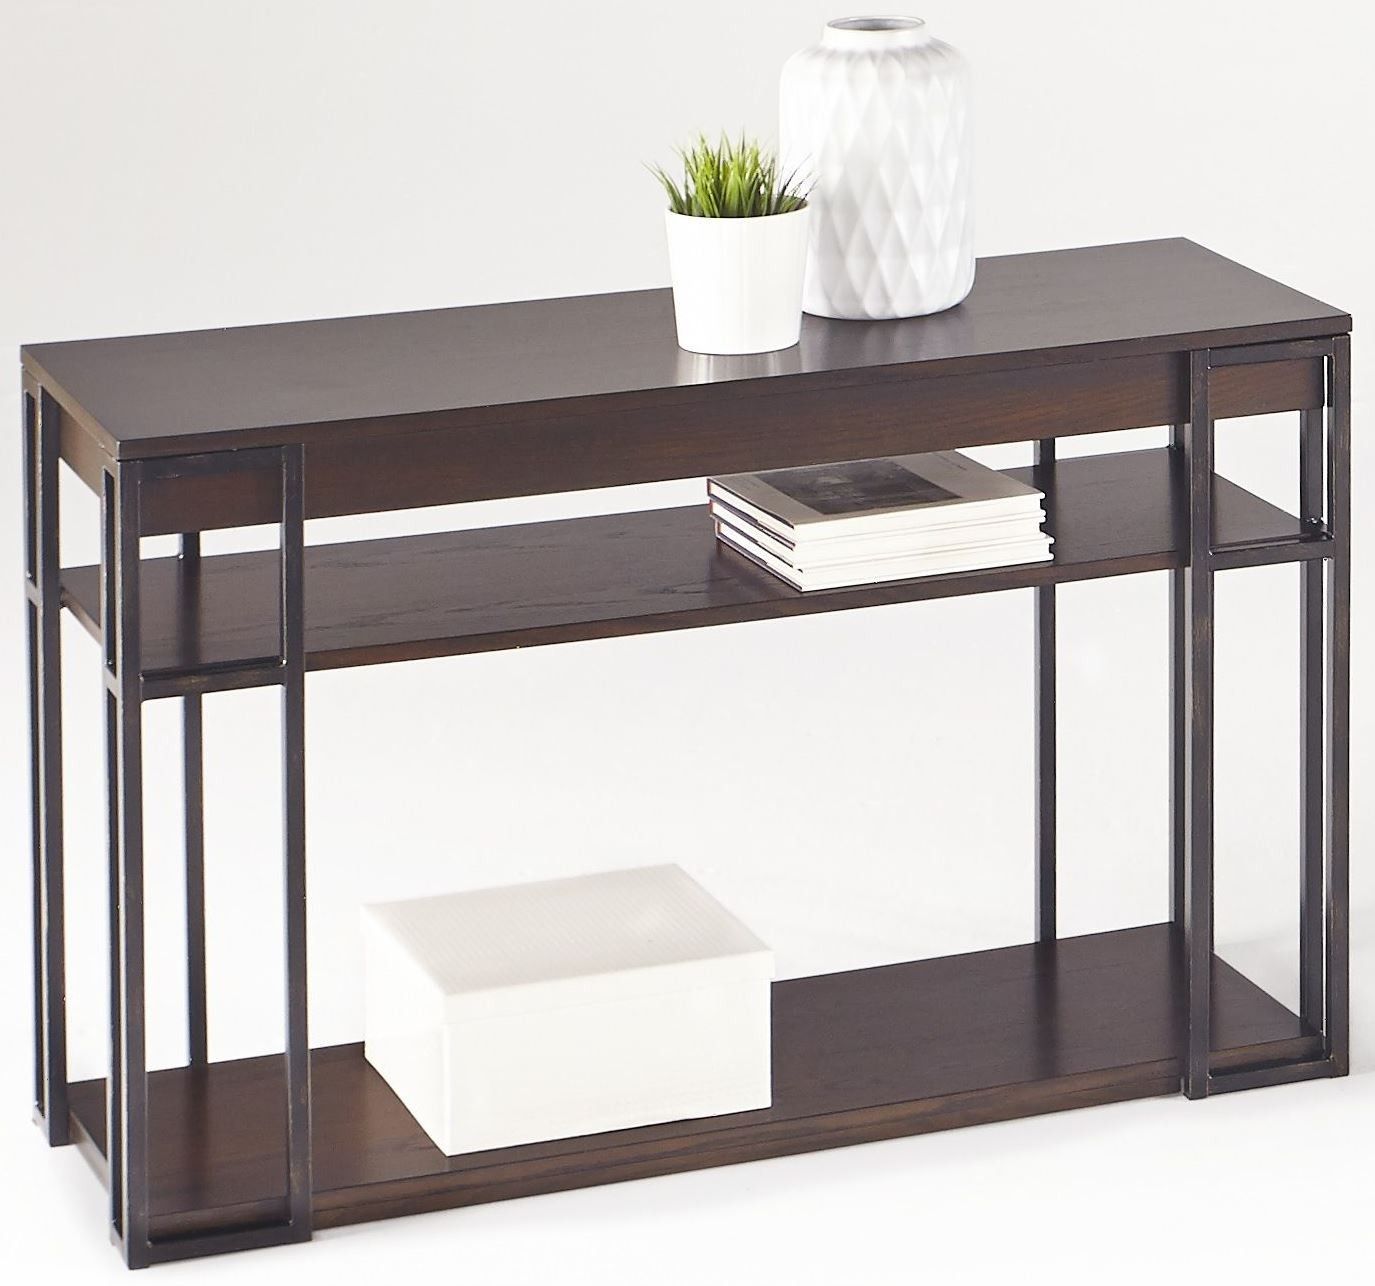 Citation And Metal Sofa/console Table From Progressive Furniture Regarding Metal Console Tables (View 12 of 20)